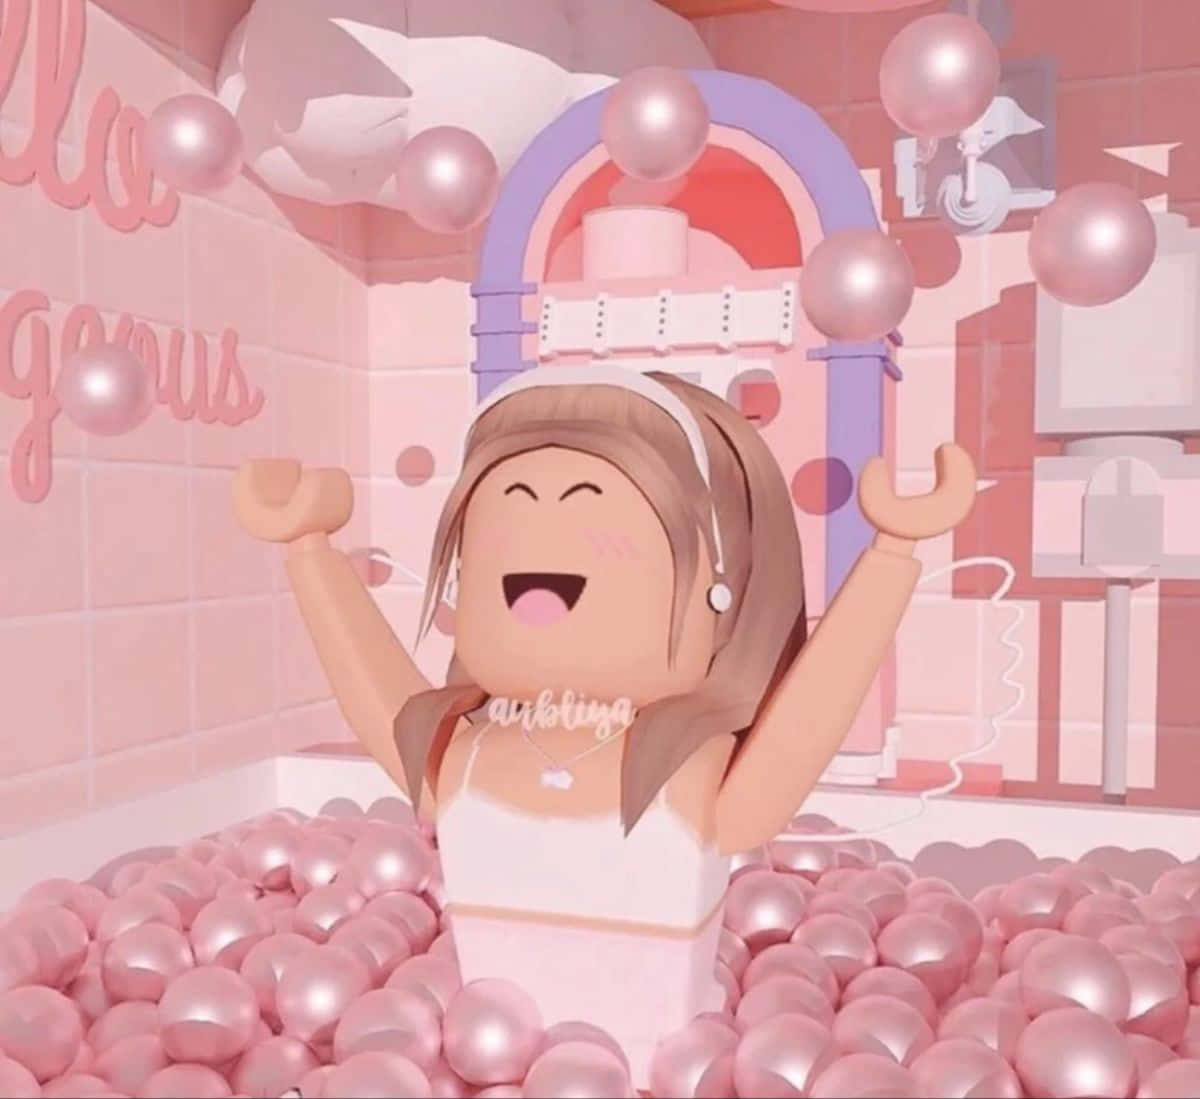 Robloxpink Ball Pit Would Be Translated As 